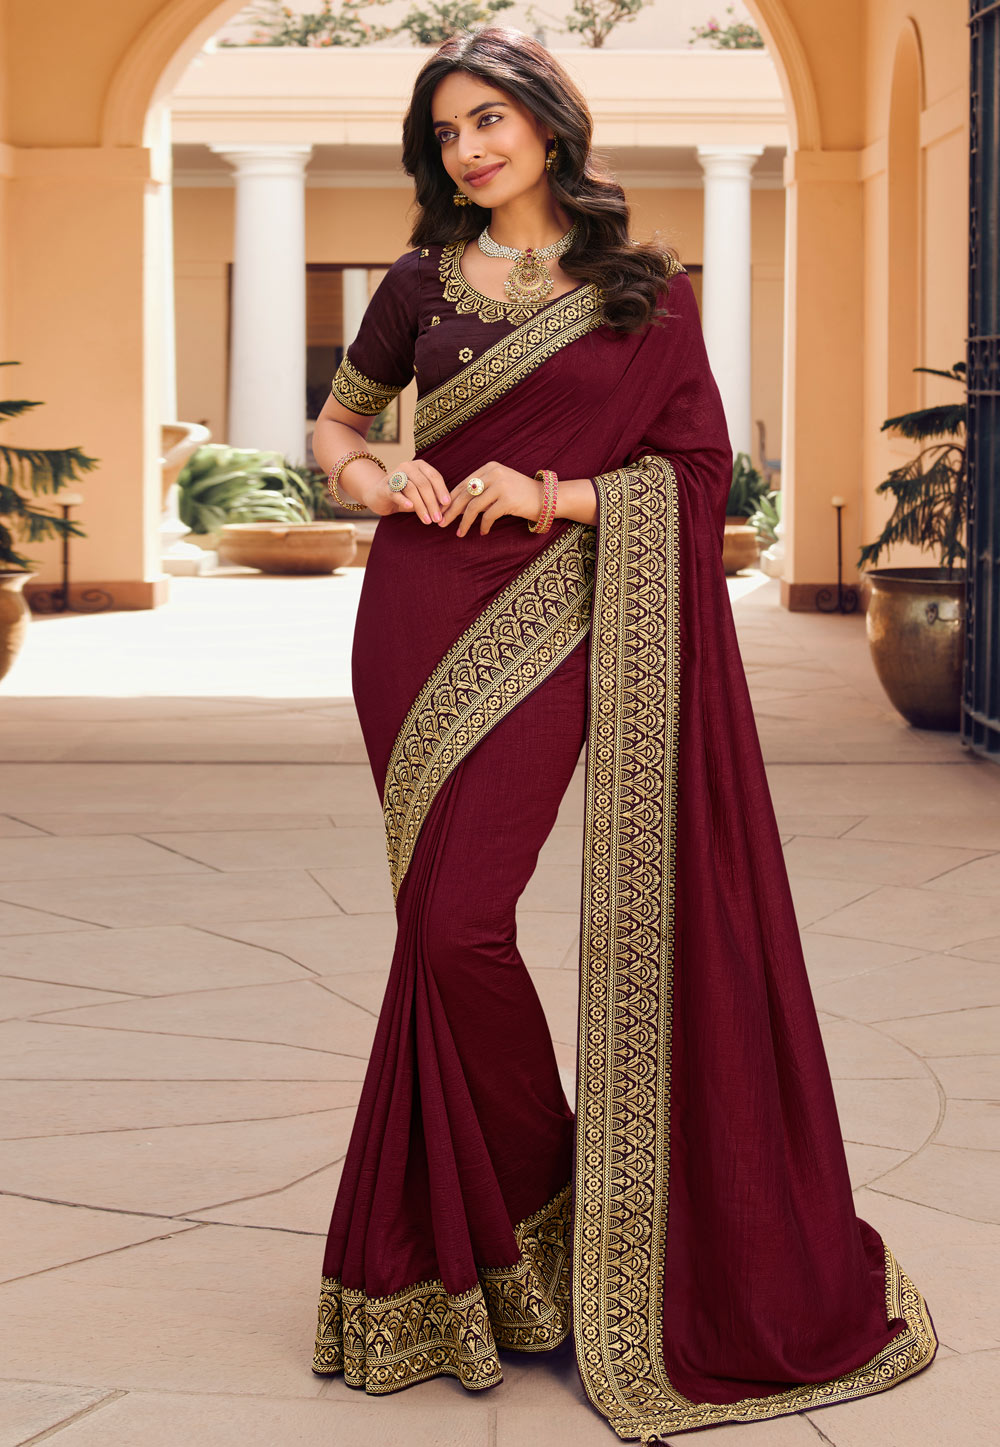 Check Out 12 Gorgeous Saree Colors You Can Wear For Weddings • Keep Me  Stylish